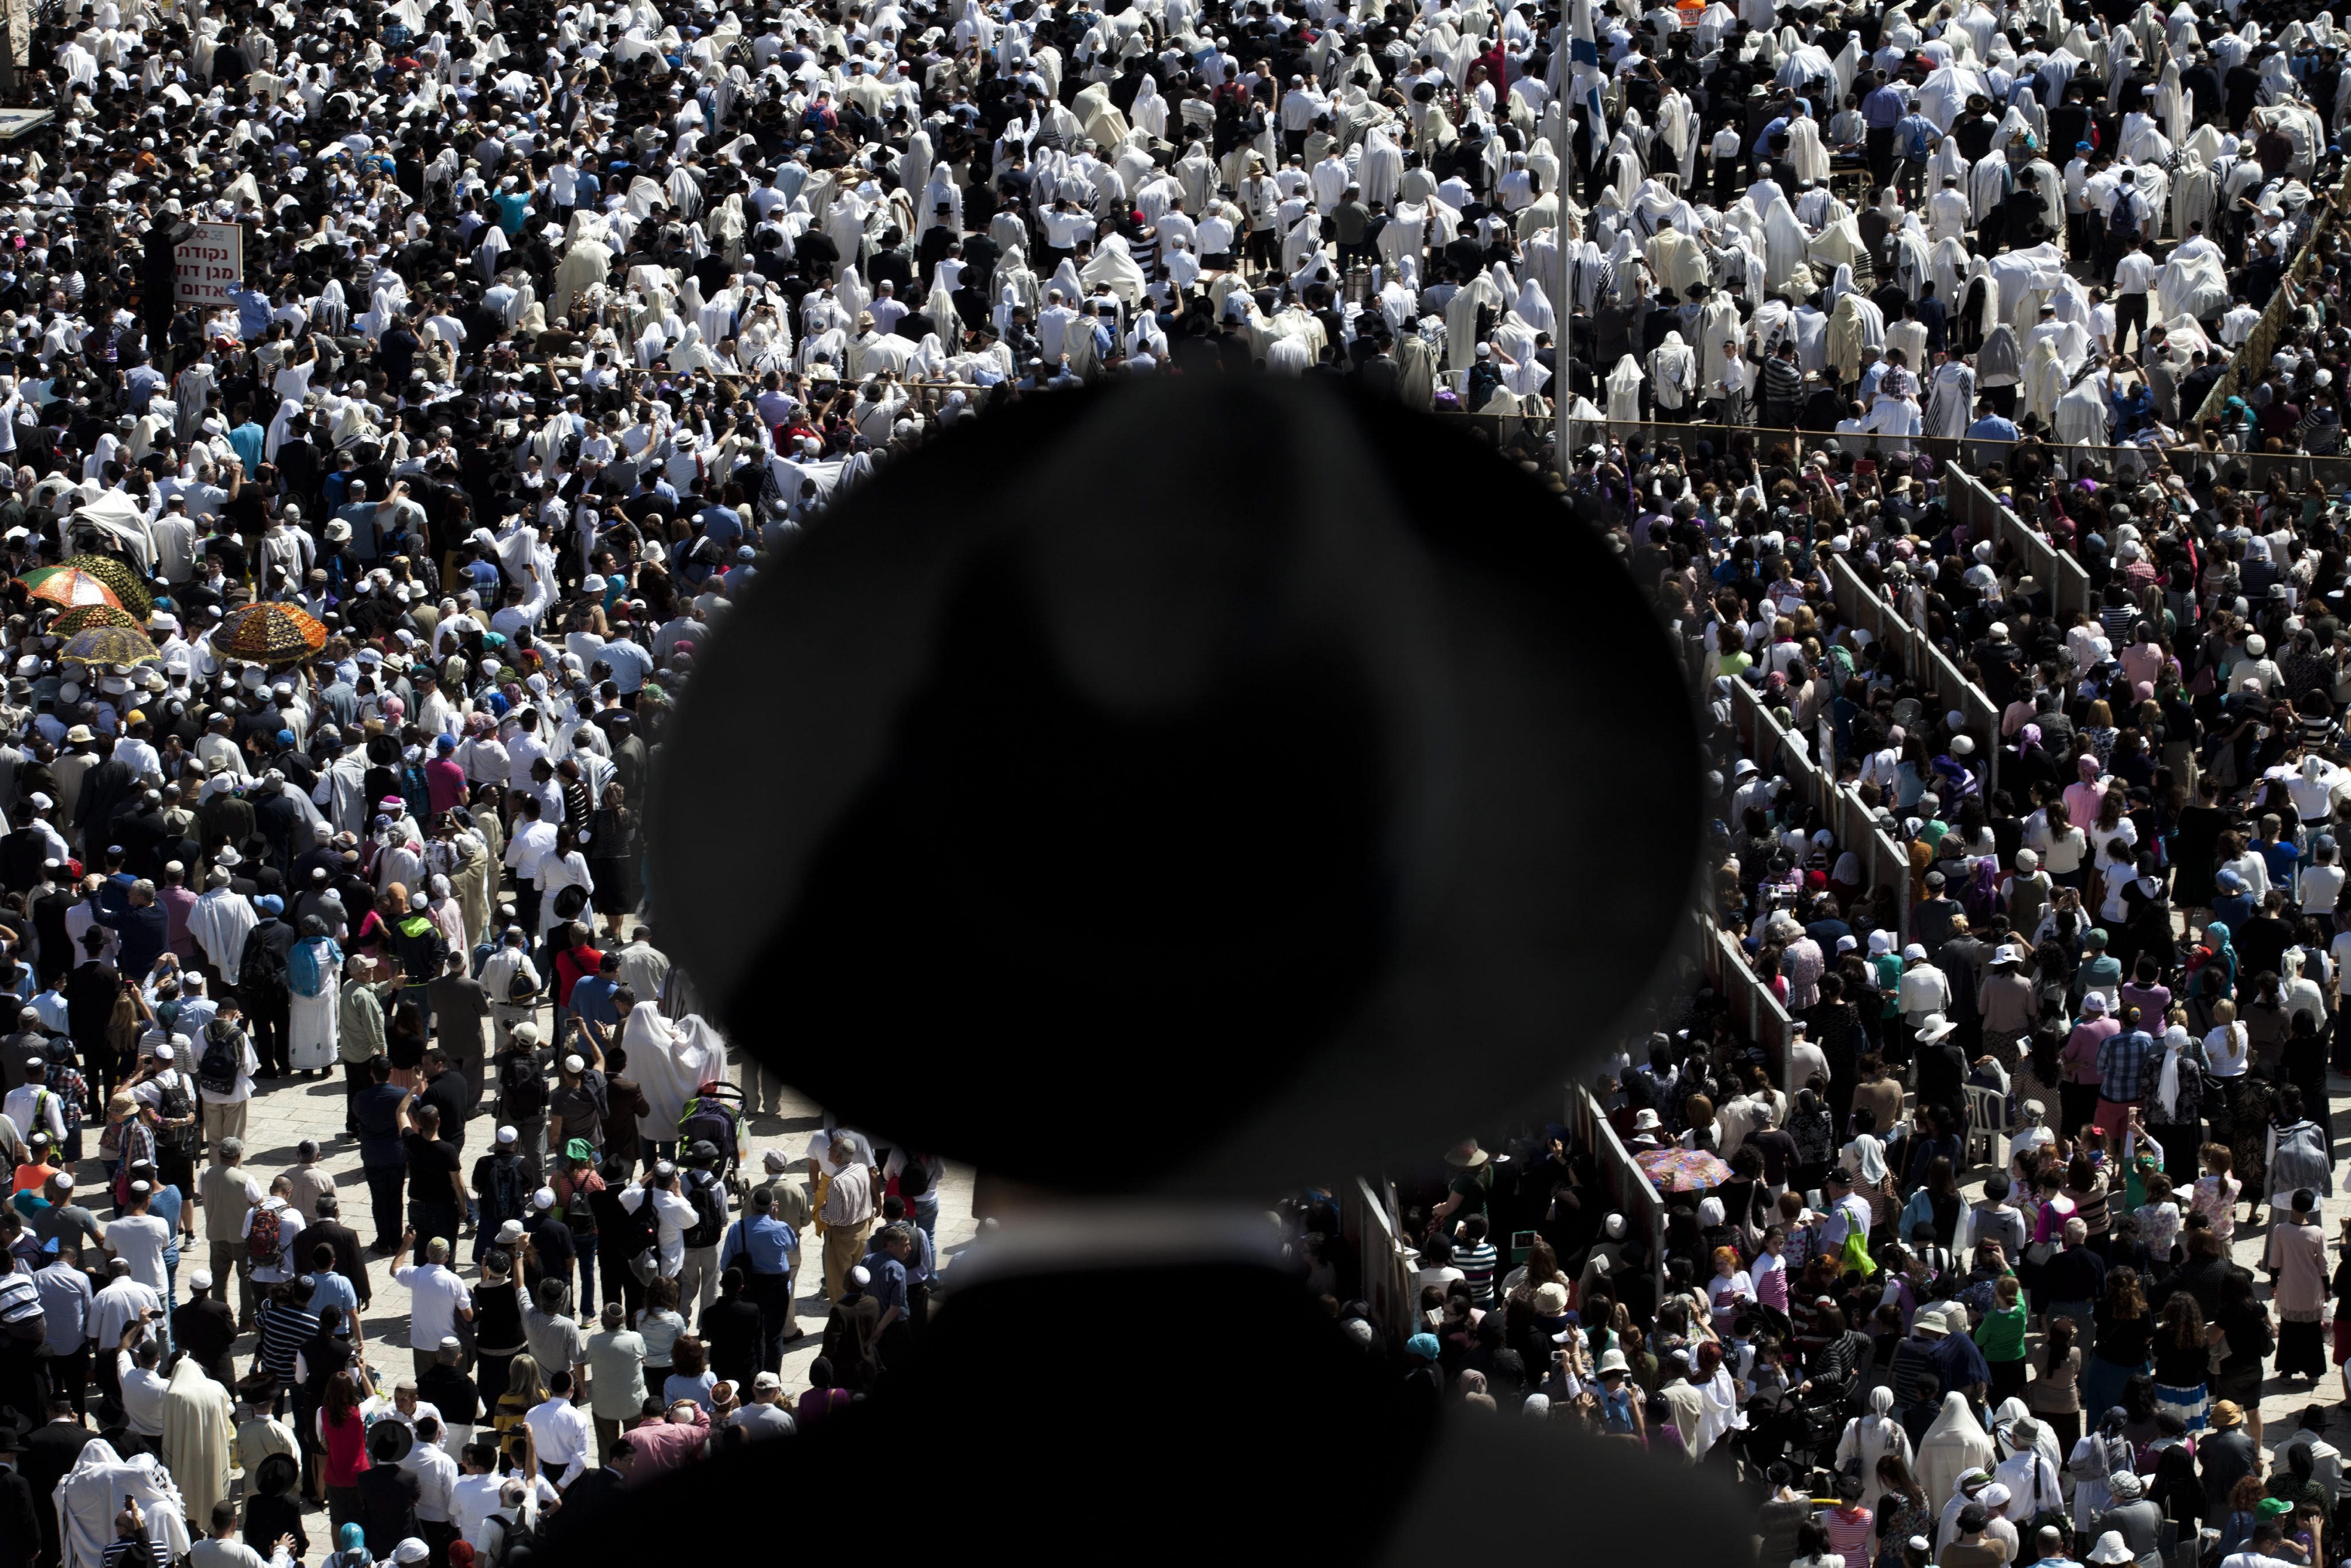 Apr. 17, 2014. An Ultra-Orthodox Jew watches others covering their heads with prayer shawls as they recite the Priestly Blessing during the high holiday of Passover, in front of the Western Wall, Judaism's holiest site, in Jerusalem, Israel.